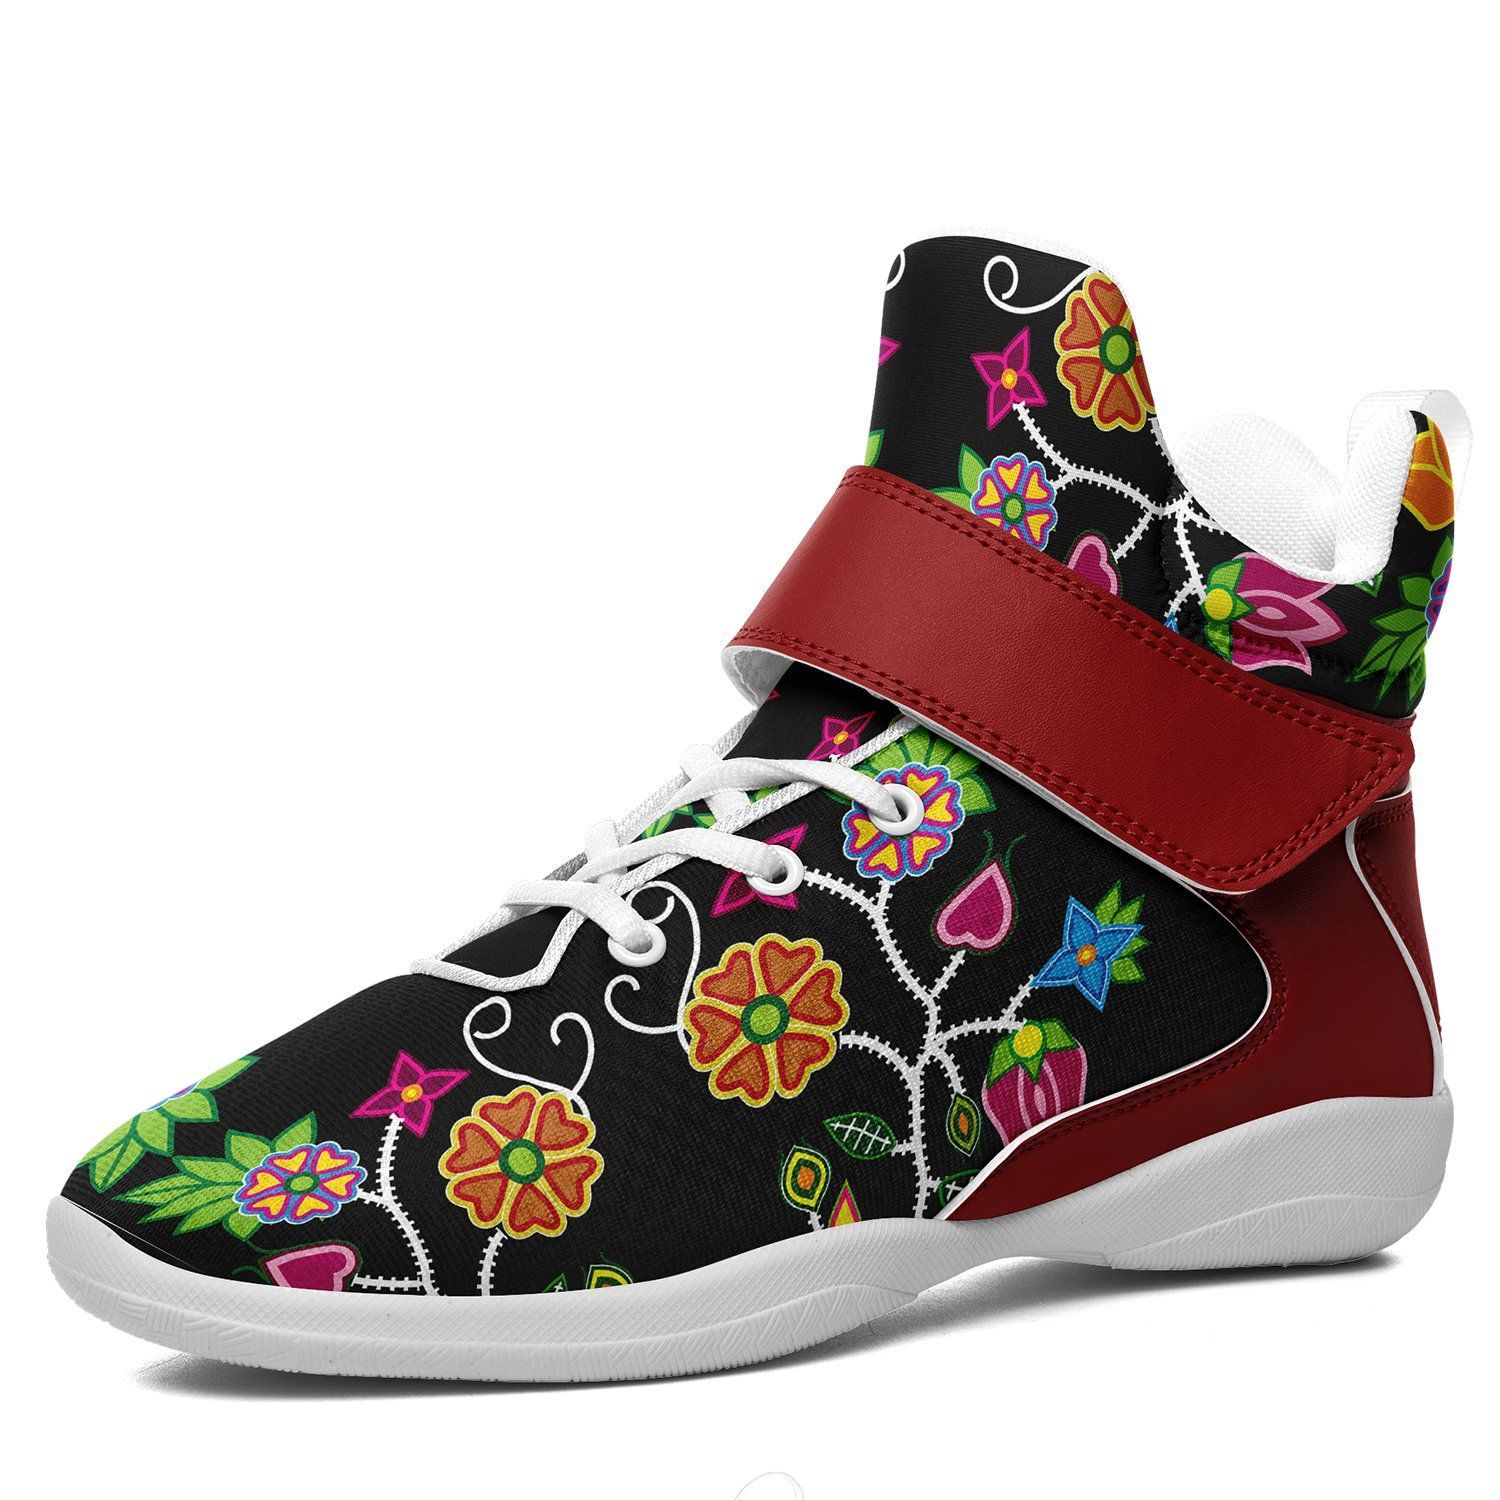 Floral Beadwork Ipottaa Basketball / Sport High Top Shoes - White Sole 49 Dzine US Men 7 / EUR 40 White Sole with Dark Red Strap 